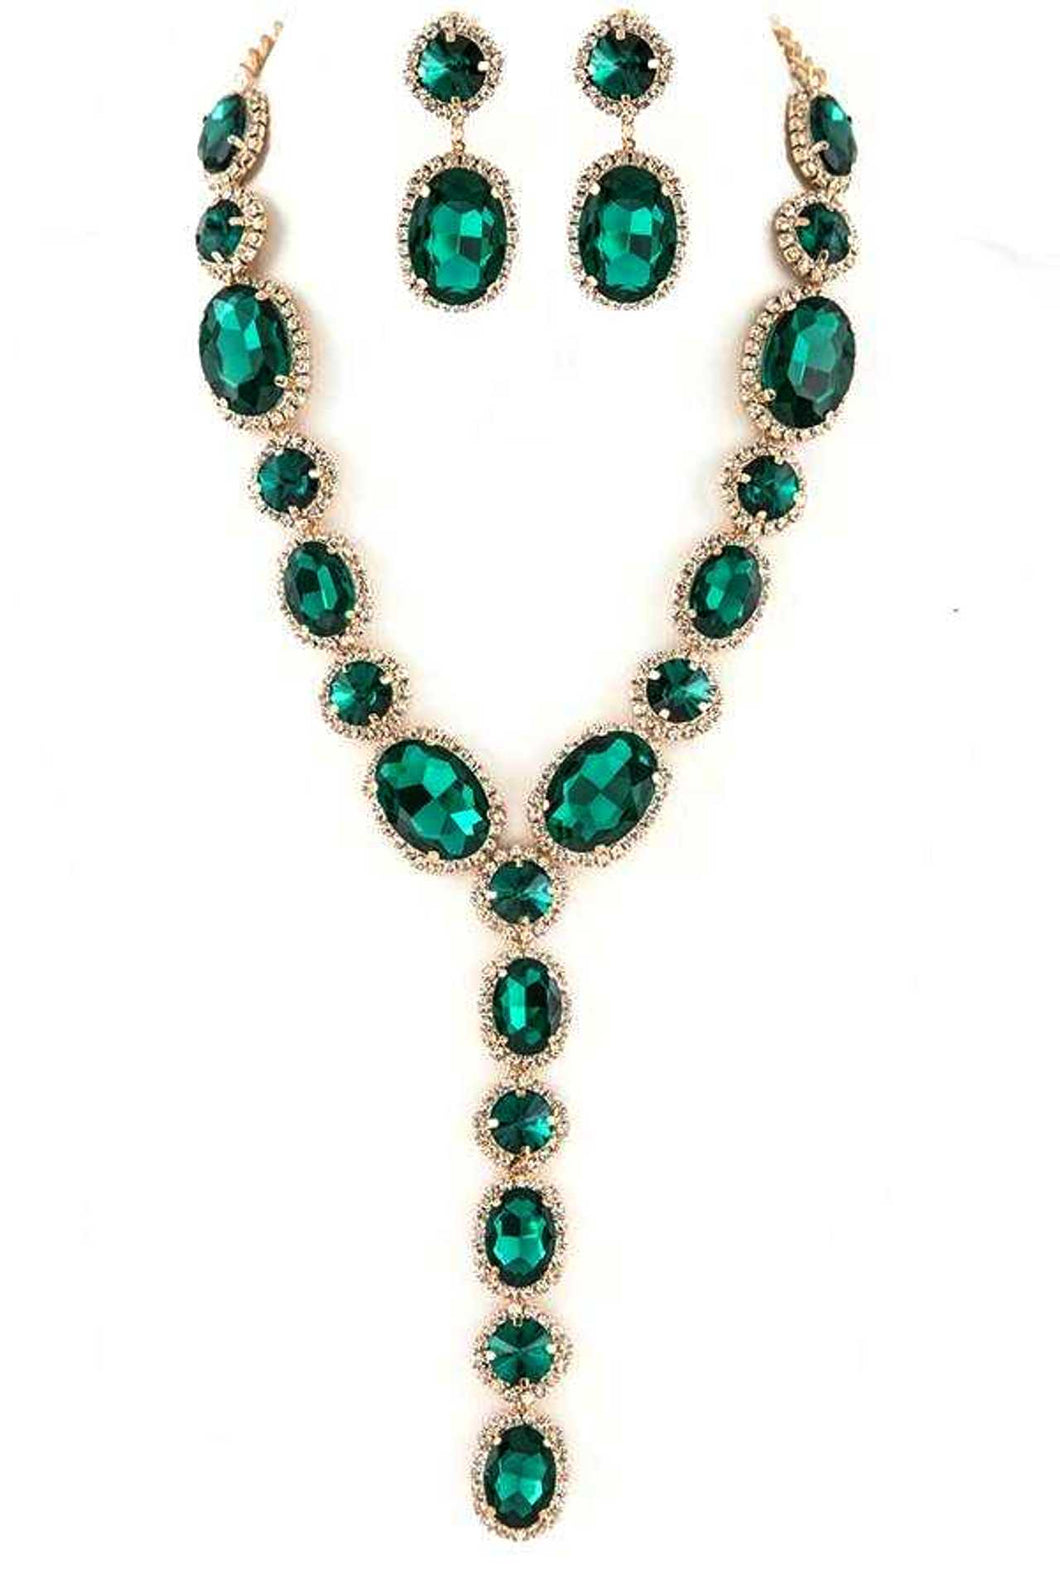 Emerald Green and Crystal  Statement Necklace and Earrings Set